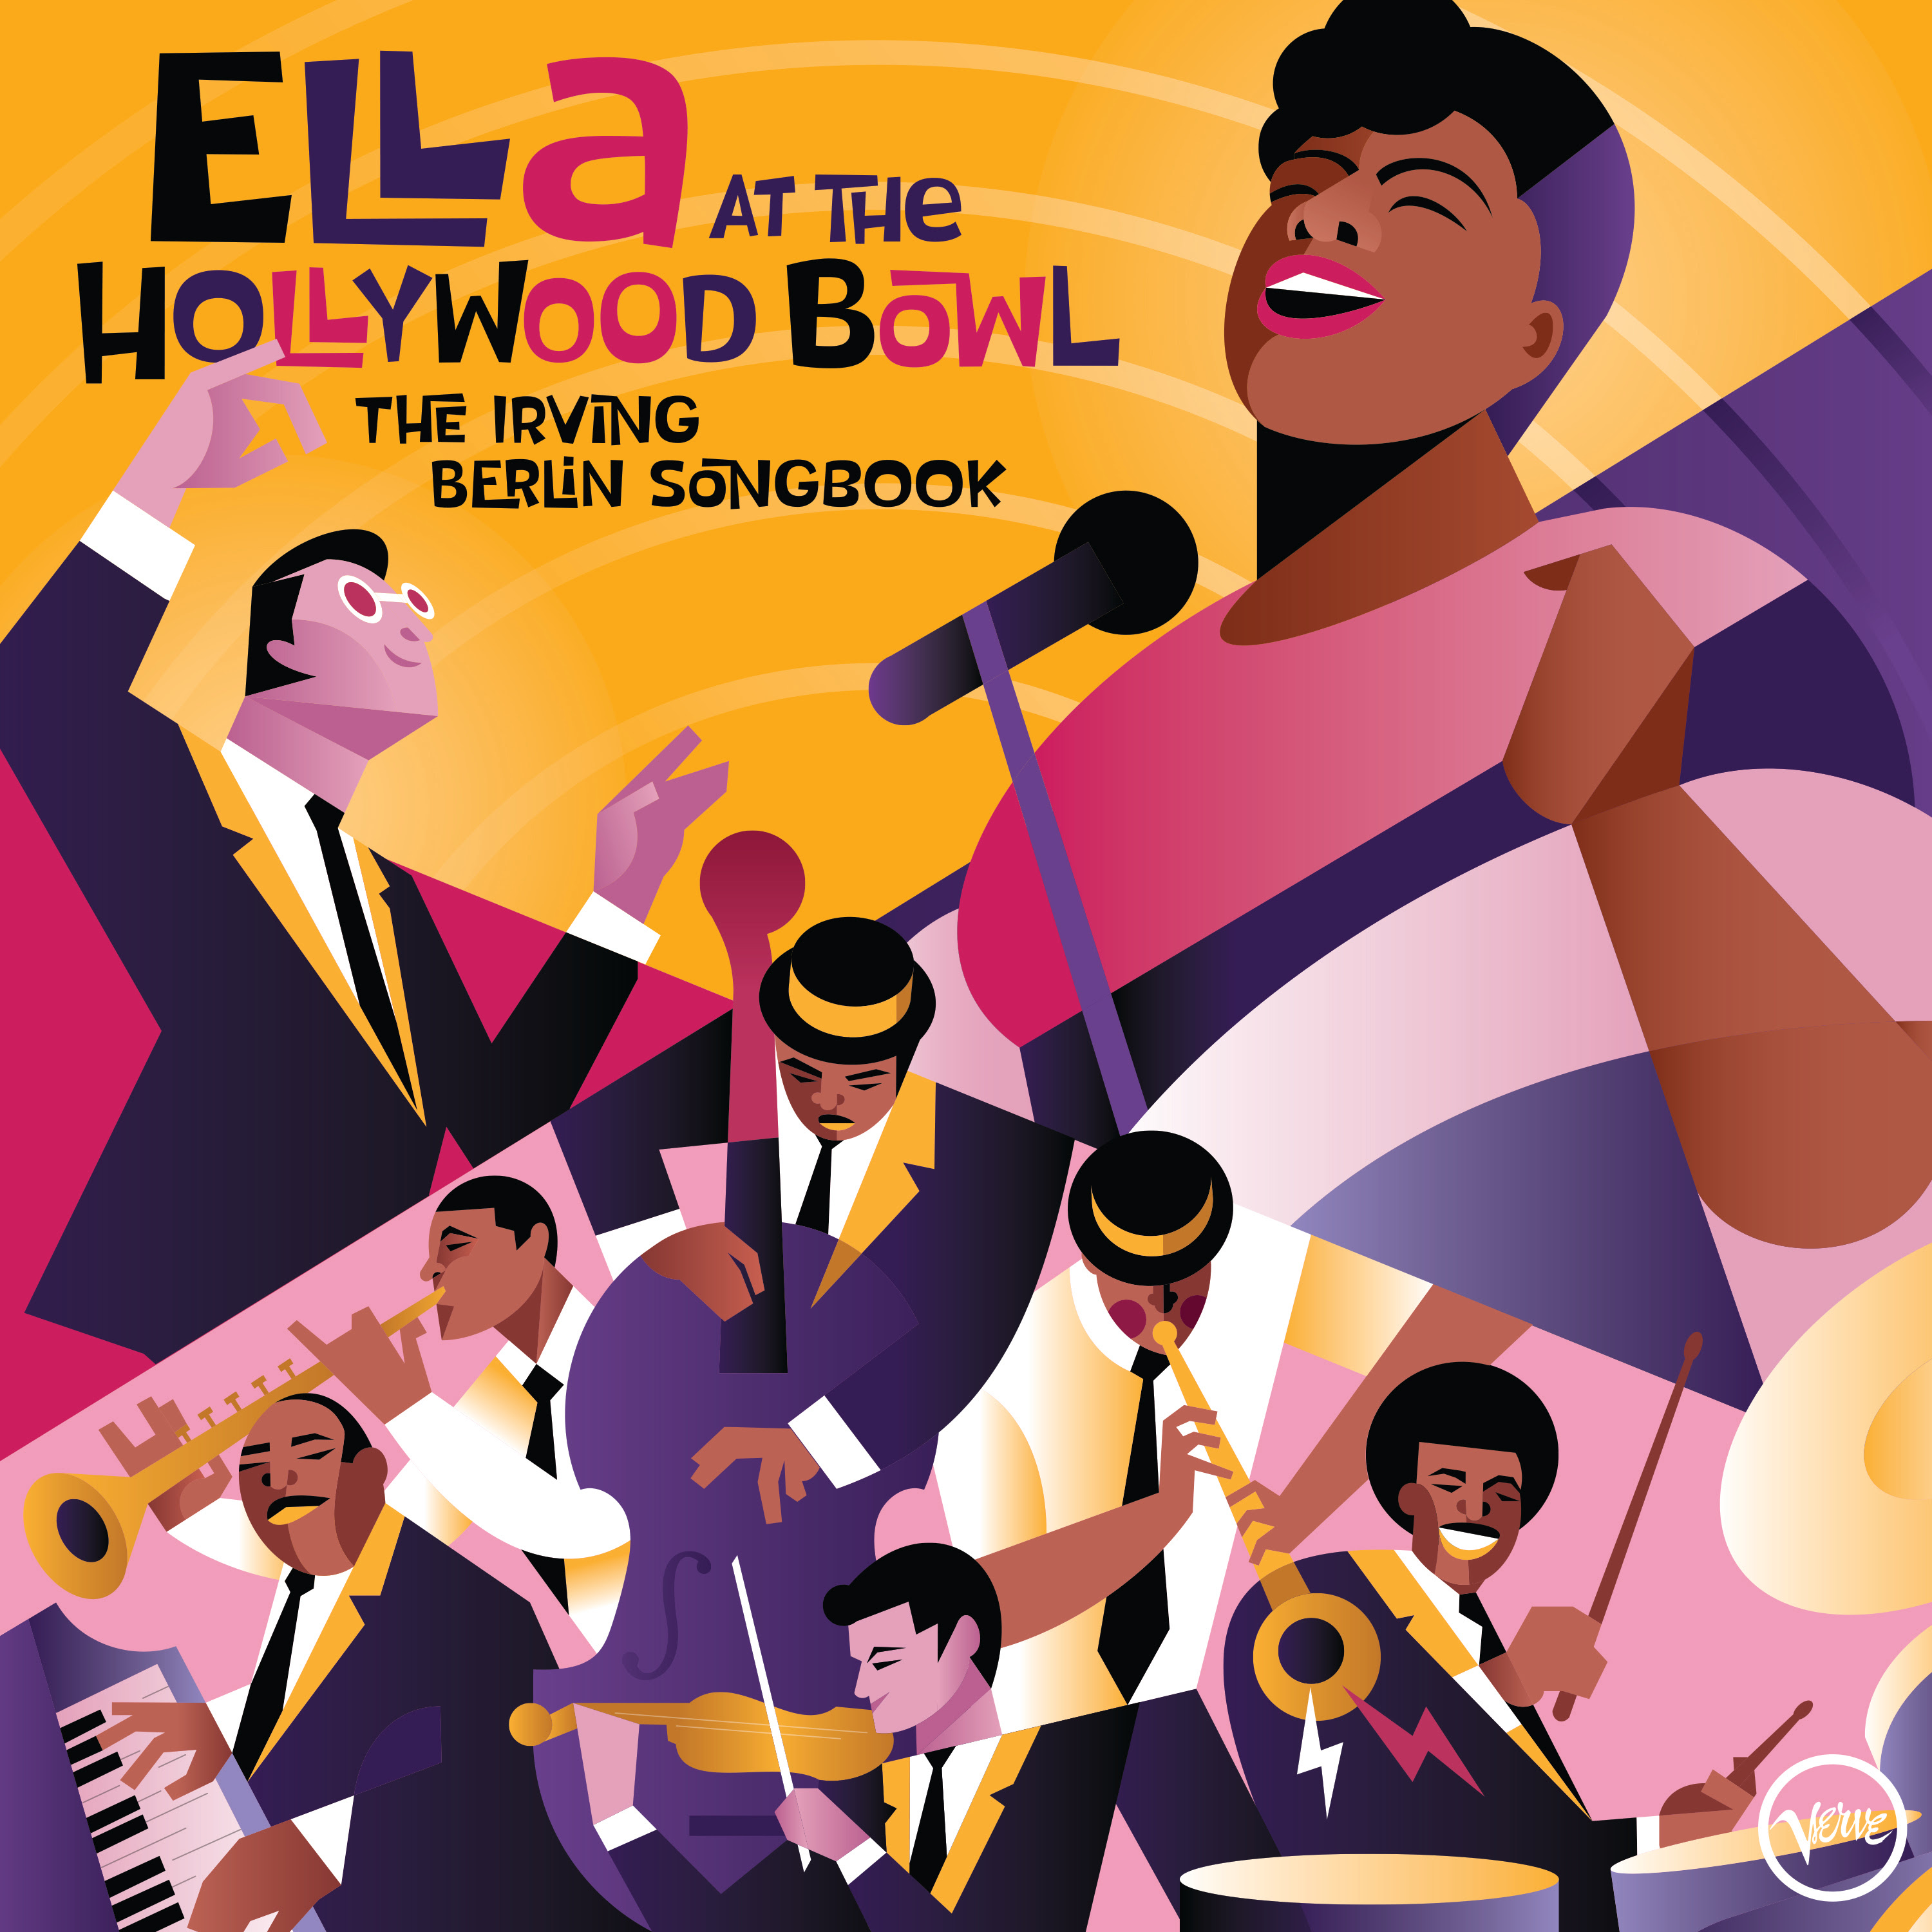 Ella Fitzgerald's Superb Live Performance of "Cheek To Cheek" Recorded With Full Orchestra At Hollywood Bowl Debuts Today With Animated Video